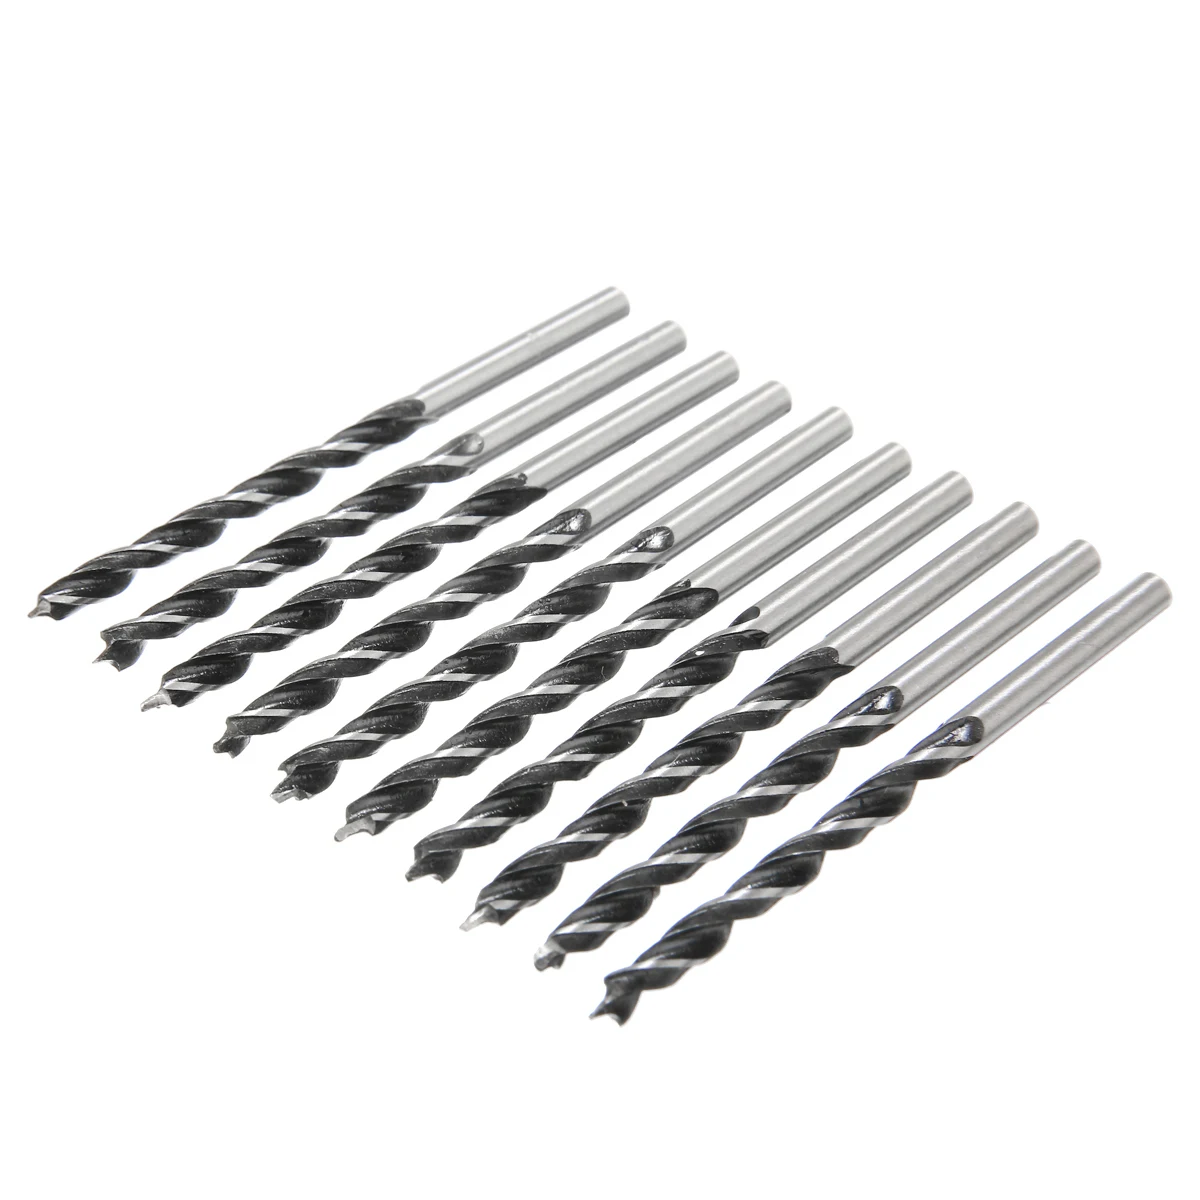 WEI-LUONG Screw 10Pcs 75mm Length Woodworking Twist Drill Bit 4mm Diameter Wood Drills with Center Point For Wood Drilling Tool Drill